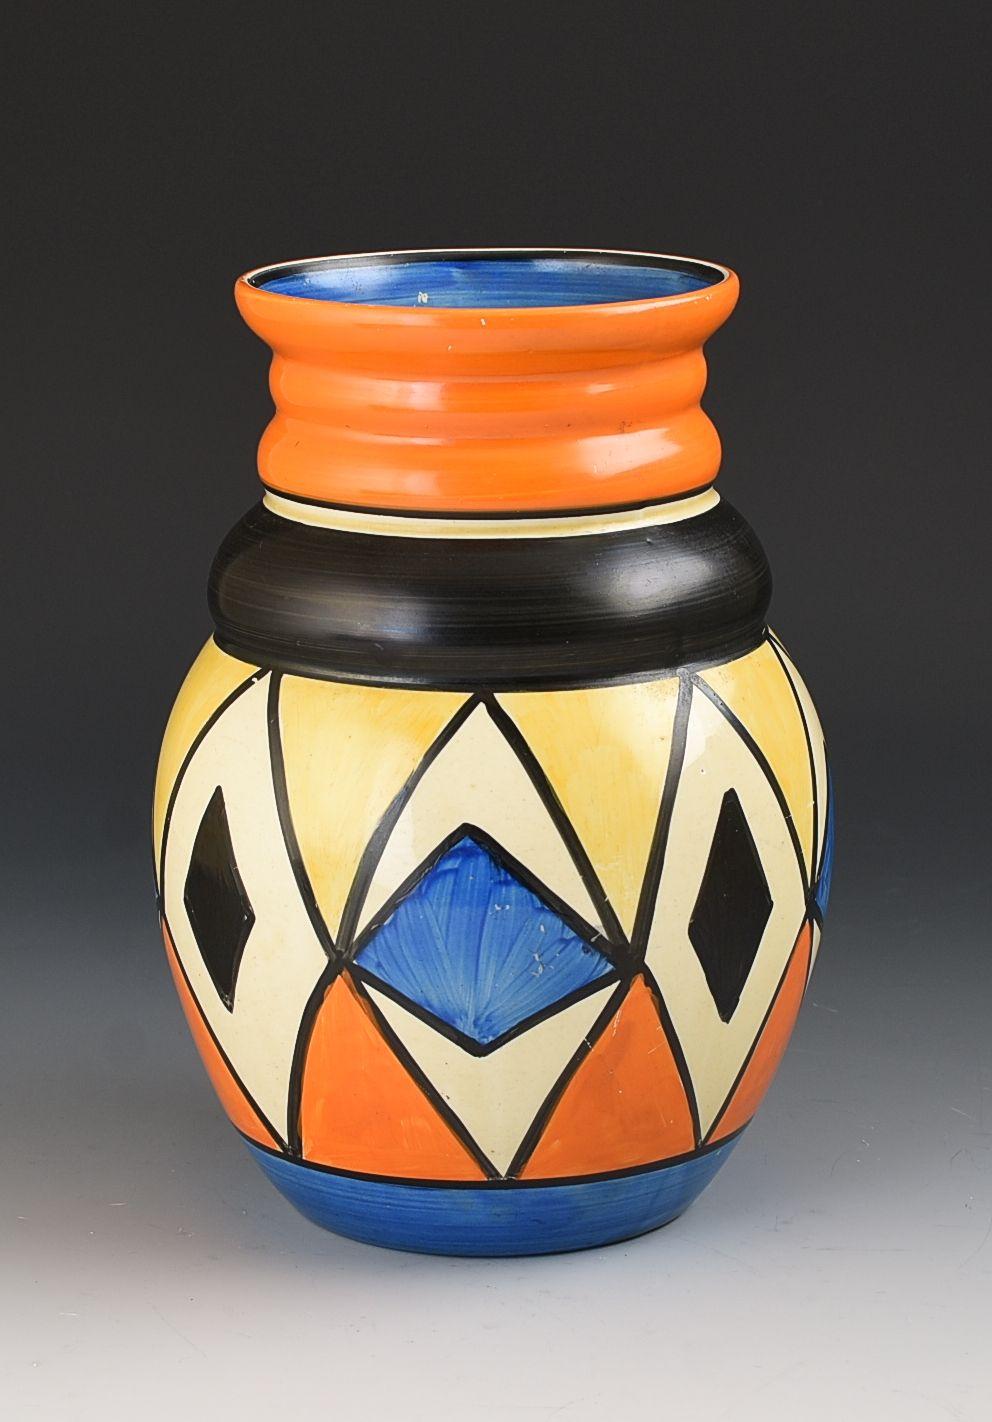 A fabulous rare abstract design that is boldly shown on this really popular shape. This variant/colourway of Double Diamonds i have not seen before and works perfectly on the vase. There is a tiny bit of wear to the blue on one panel otherwise i can